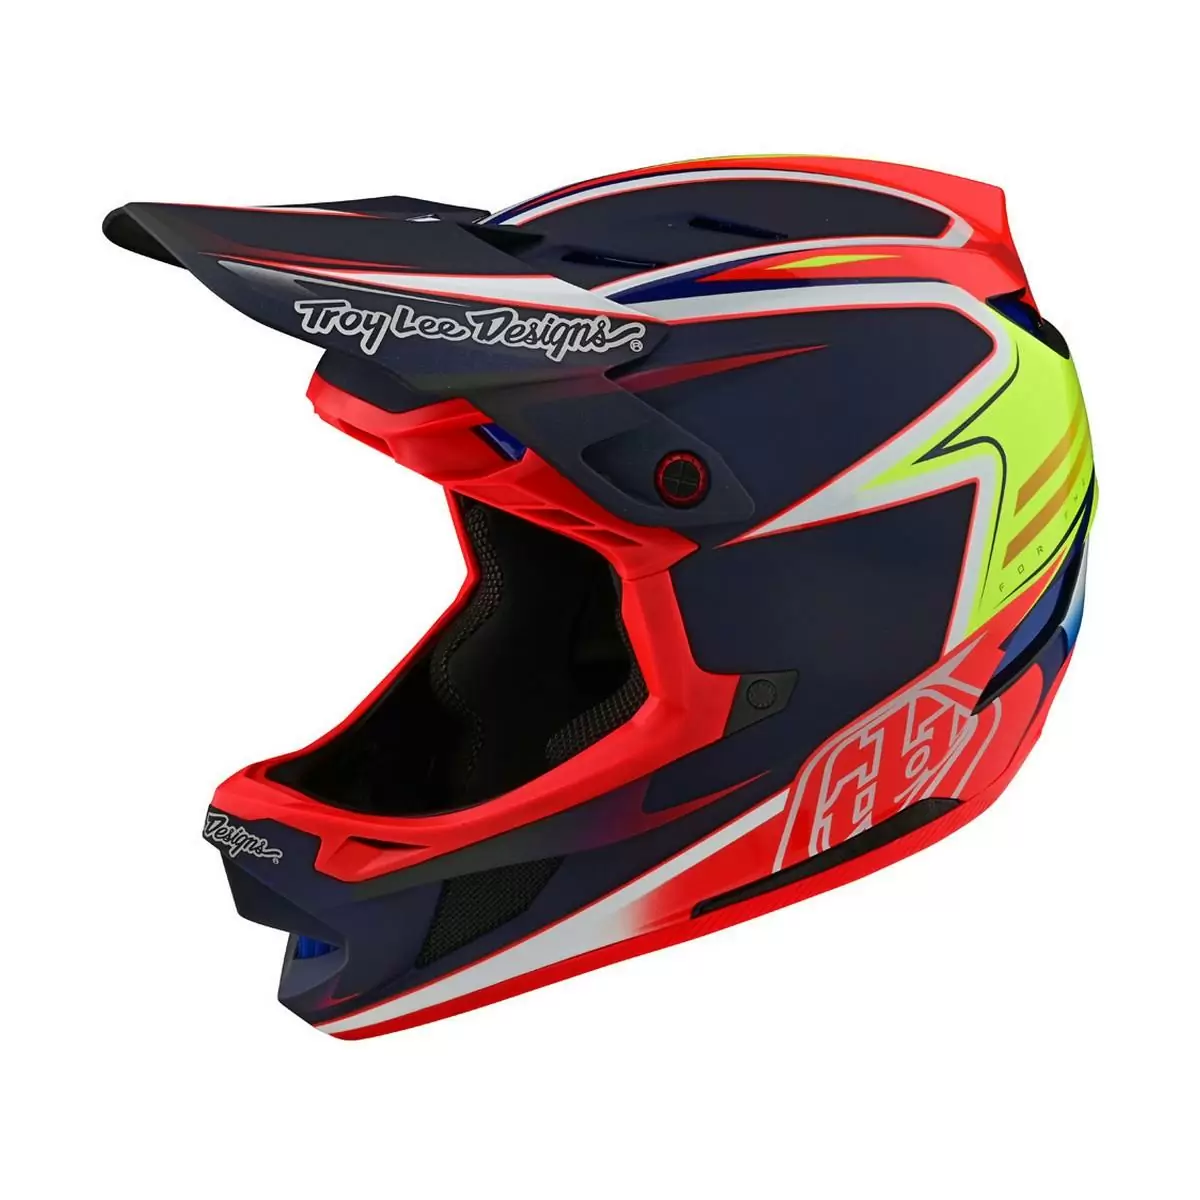 Full Face MTB Helmet D4 MIPS TeXtreme Carbon Stealth Black/Red Size L (58-59cm) #1